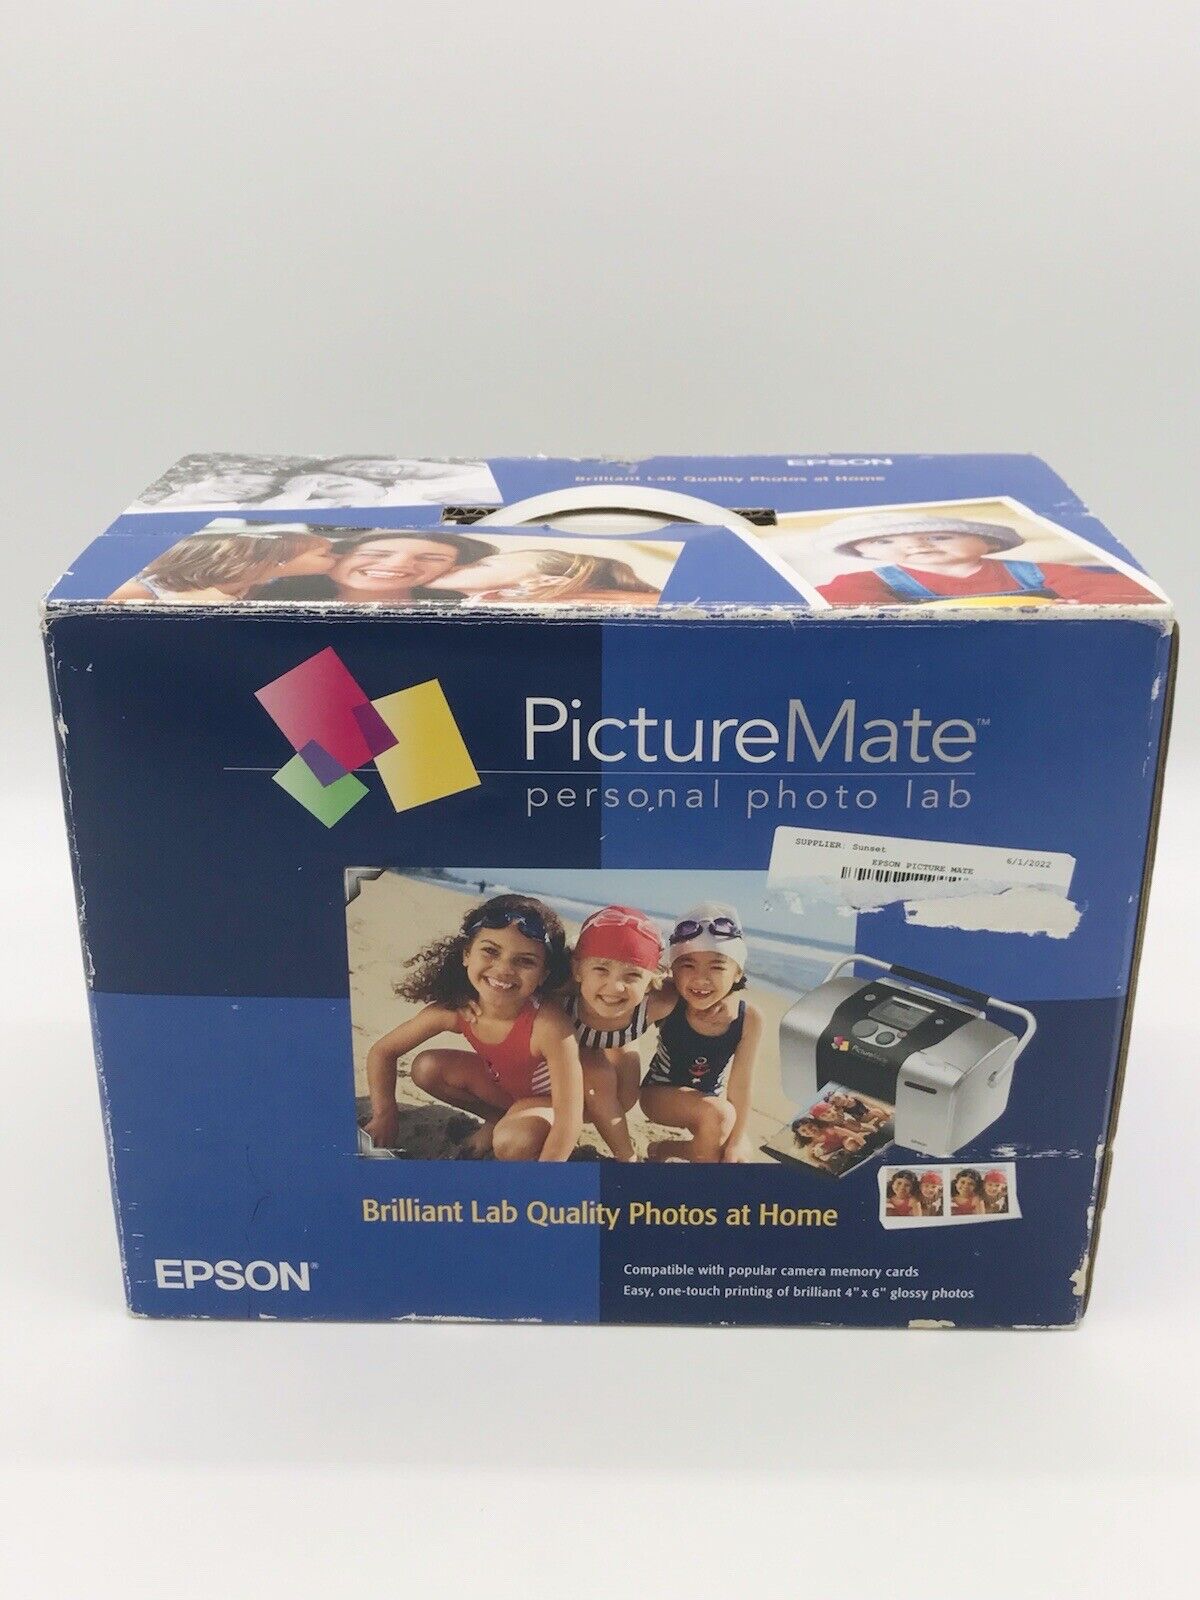 Epson Picture Mate Personal Photo Lab Brilliant Quality at Home Printing 4”x6”